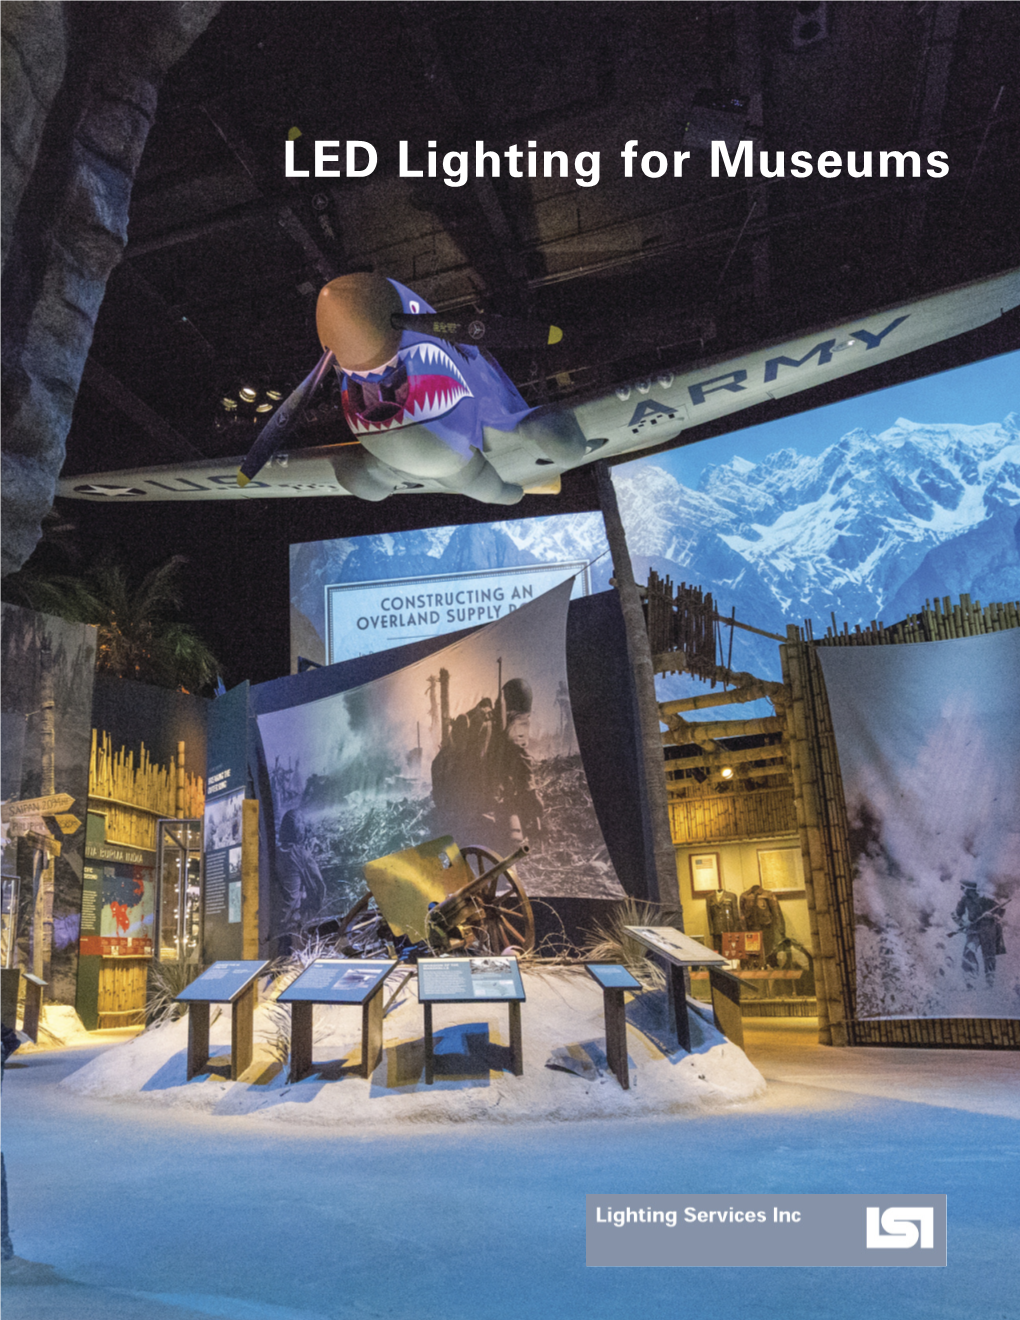 LED Lighting for Museums Since 1958, Lighting Services Inc Has Been Producing the Finest Quality Track, Accent and Display Lighting Systems